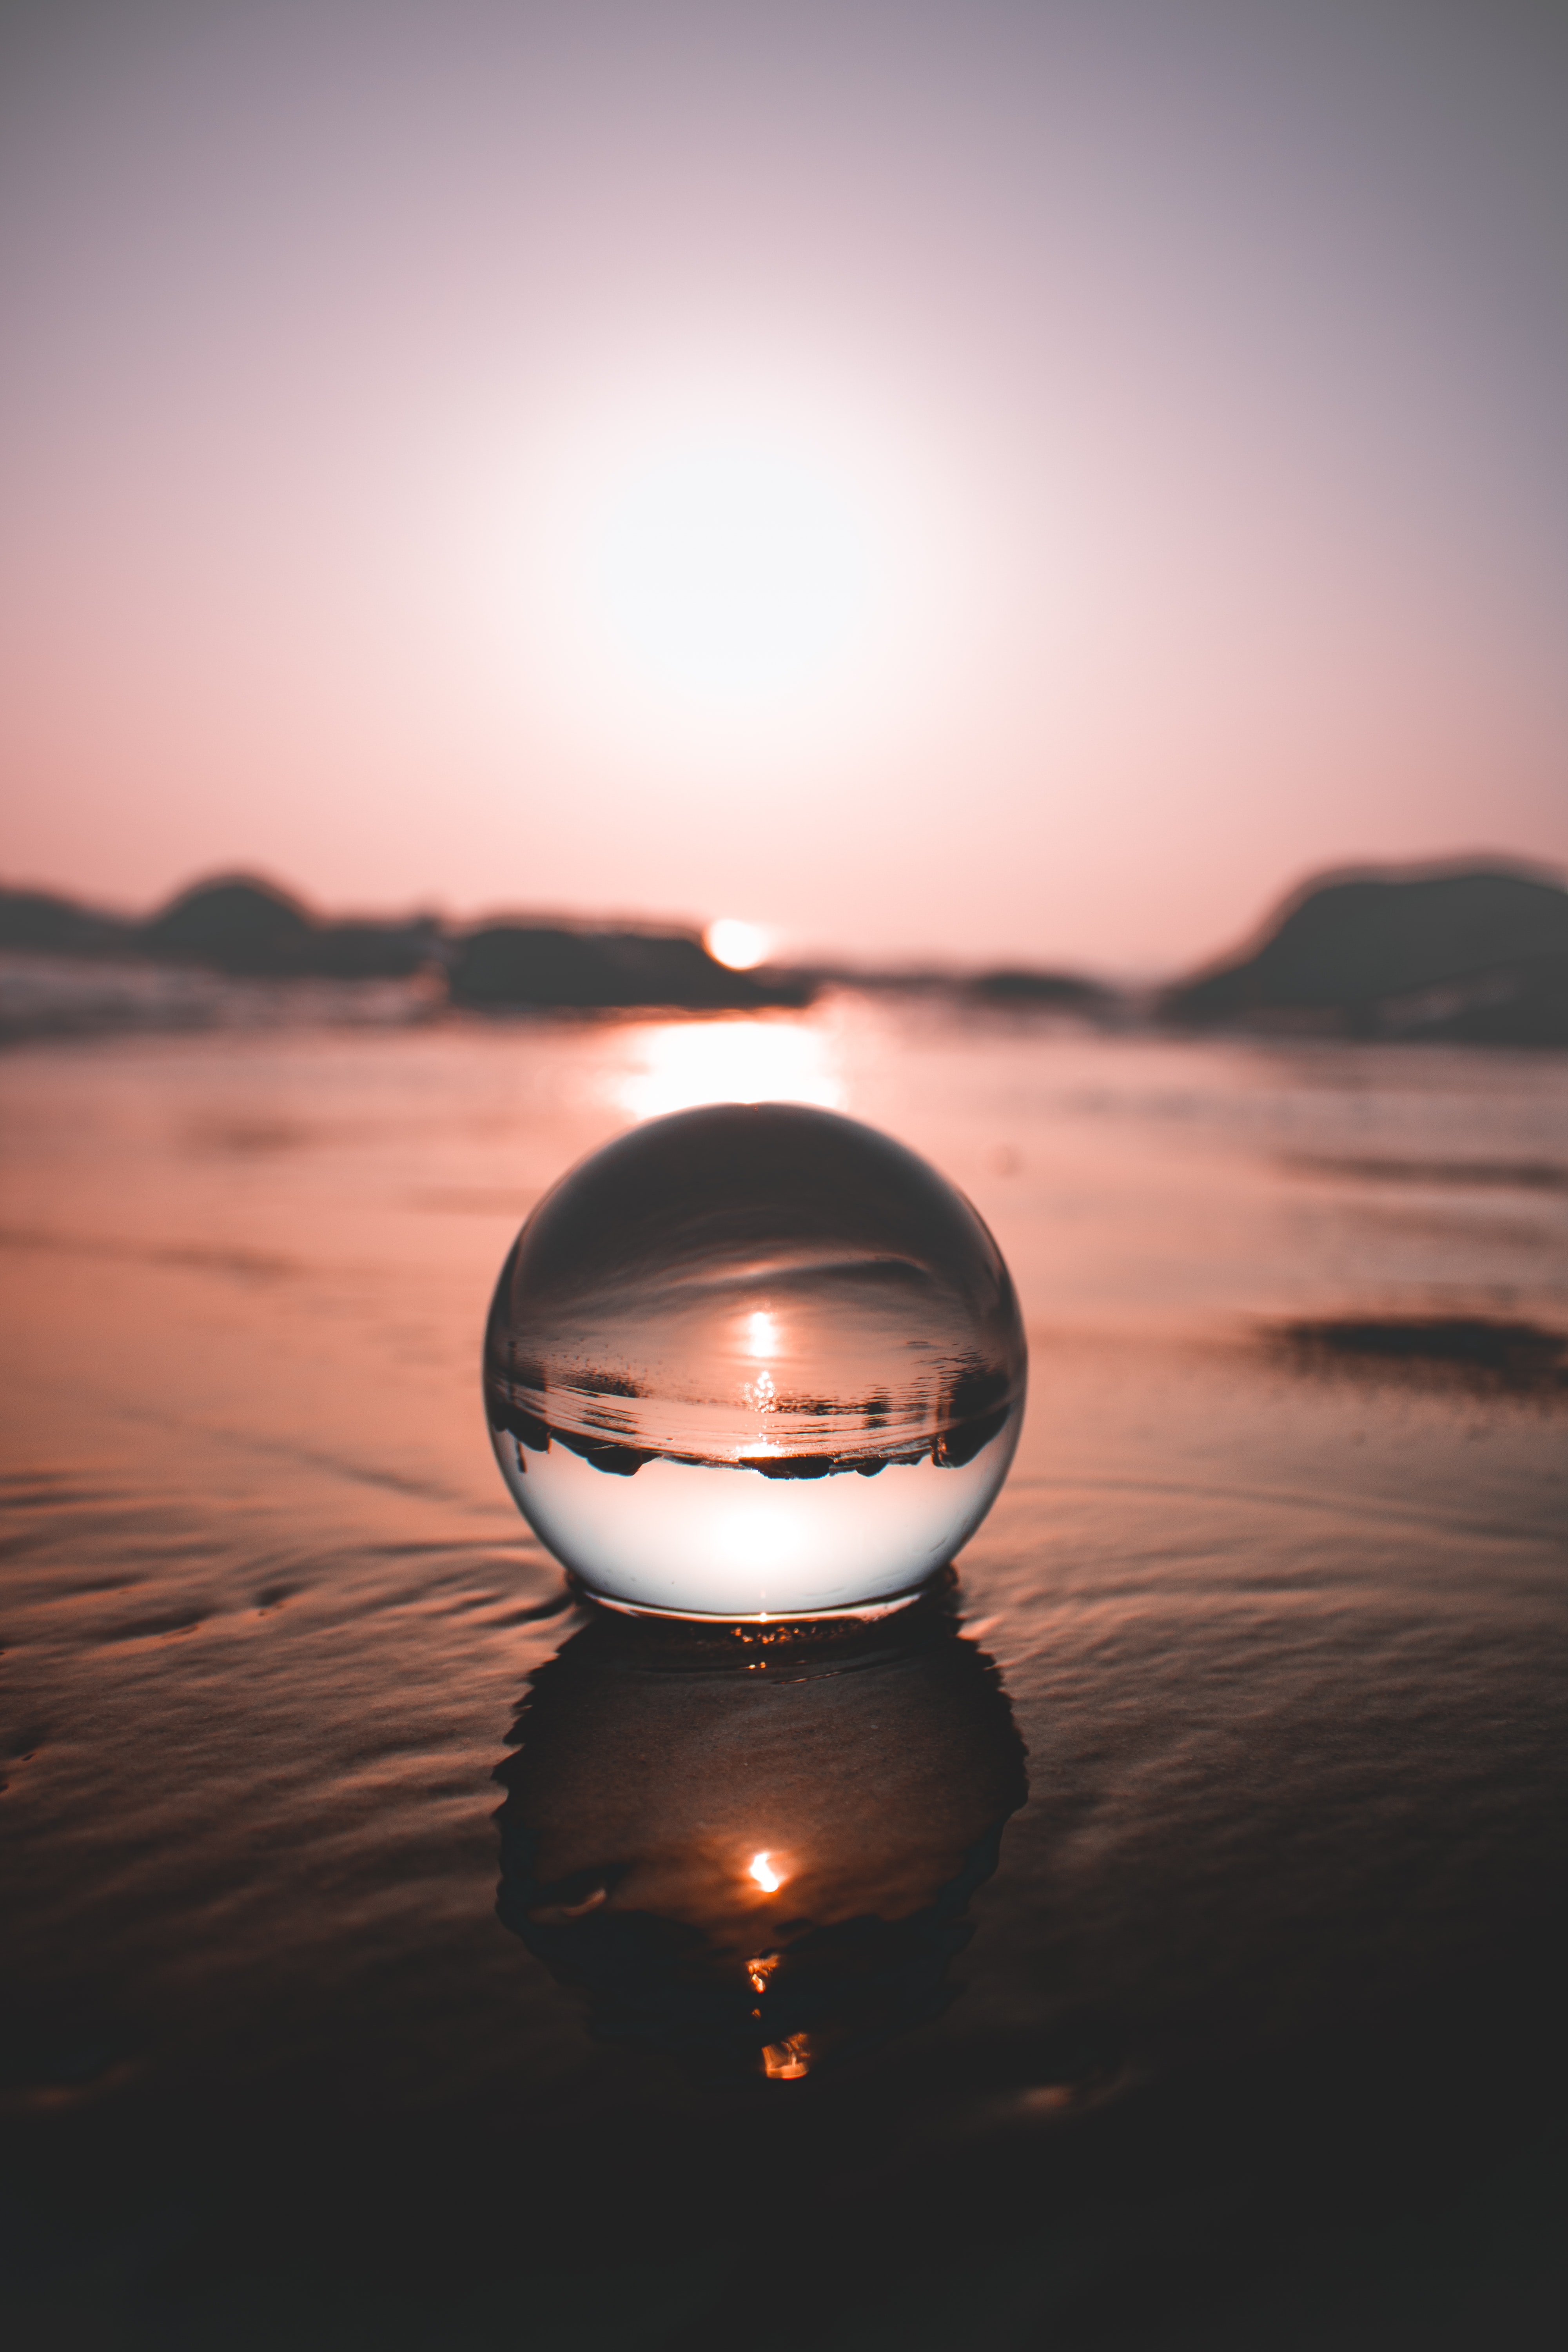 wallpapers miscellanea, focus, water, reflection, miscellaneous, ball, distortion